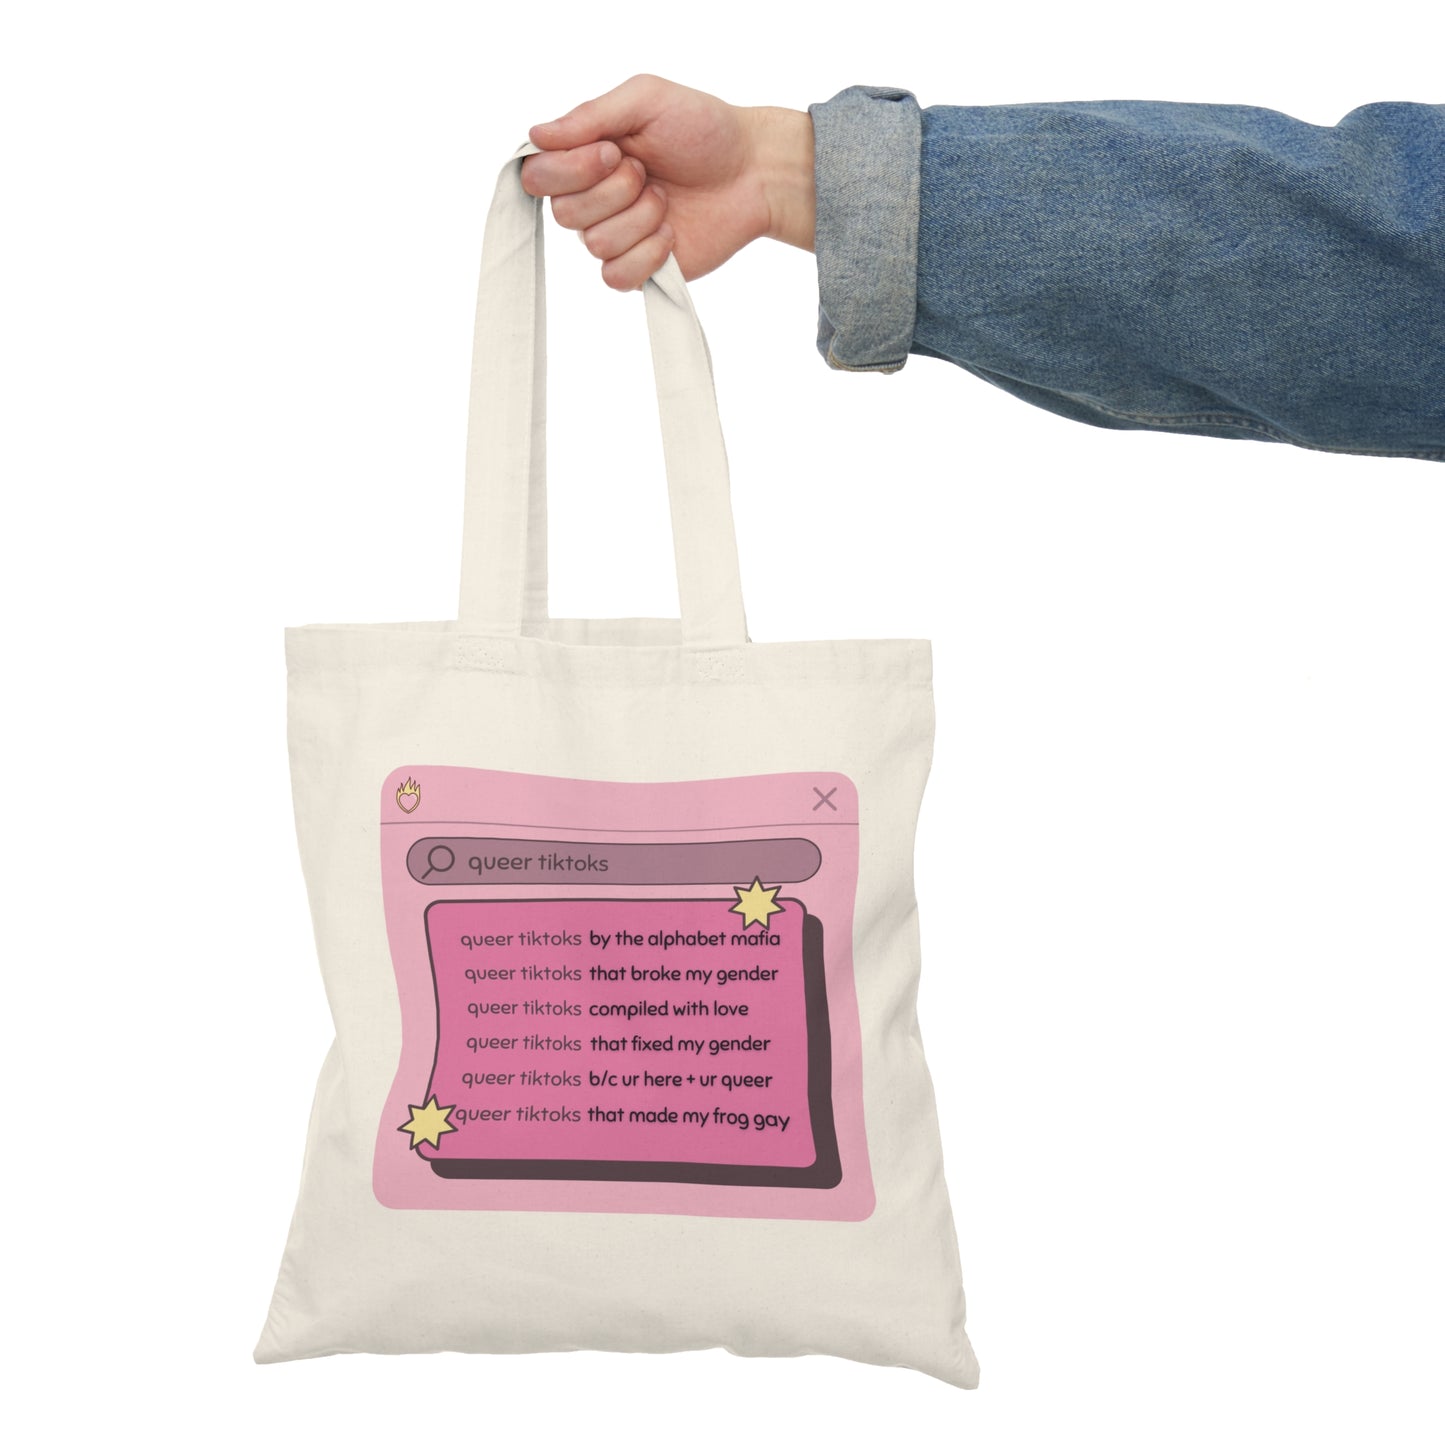 Queer Tiktoks Search Natural Tote Bag